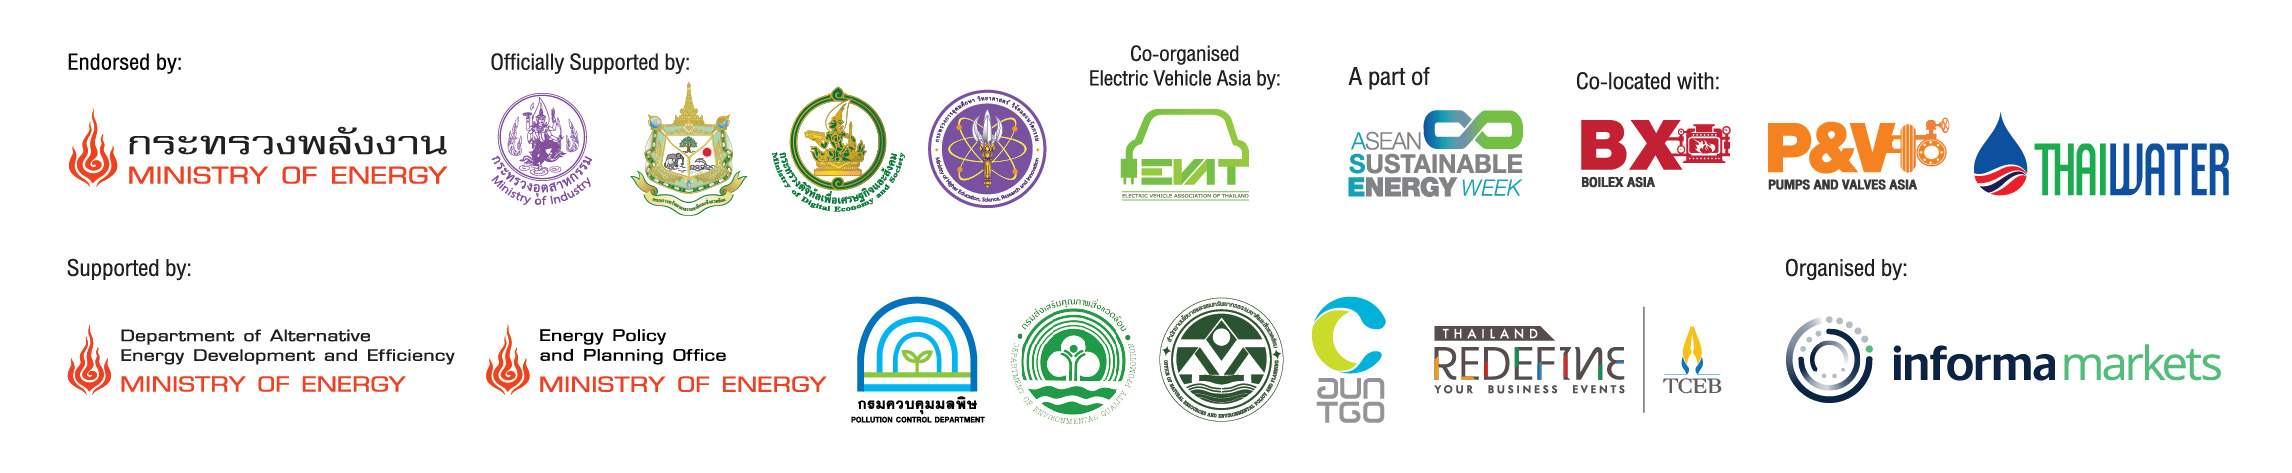 Electric Vehicle Asia 2022 E-Newsletter Footer